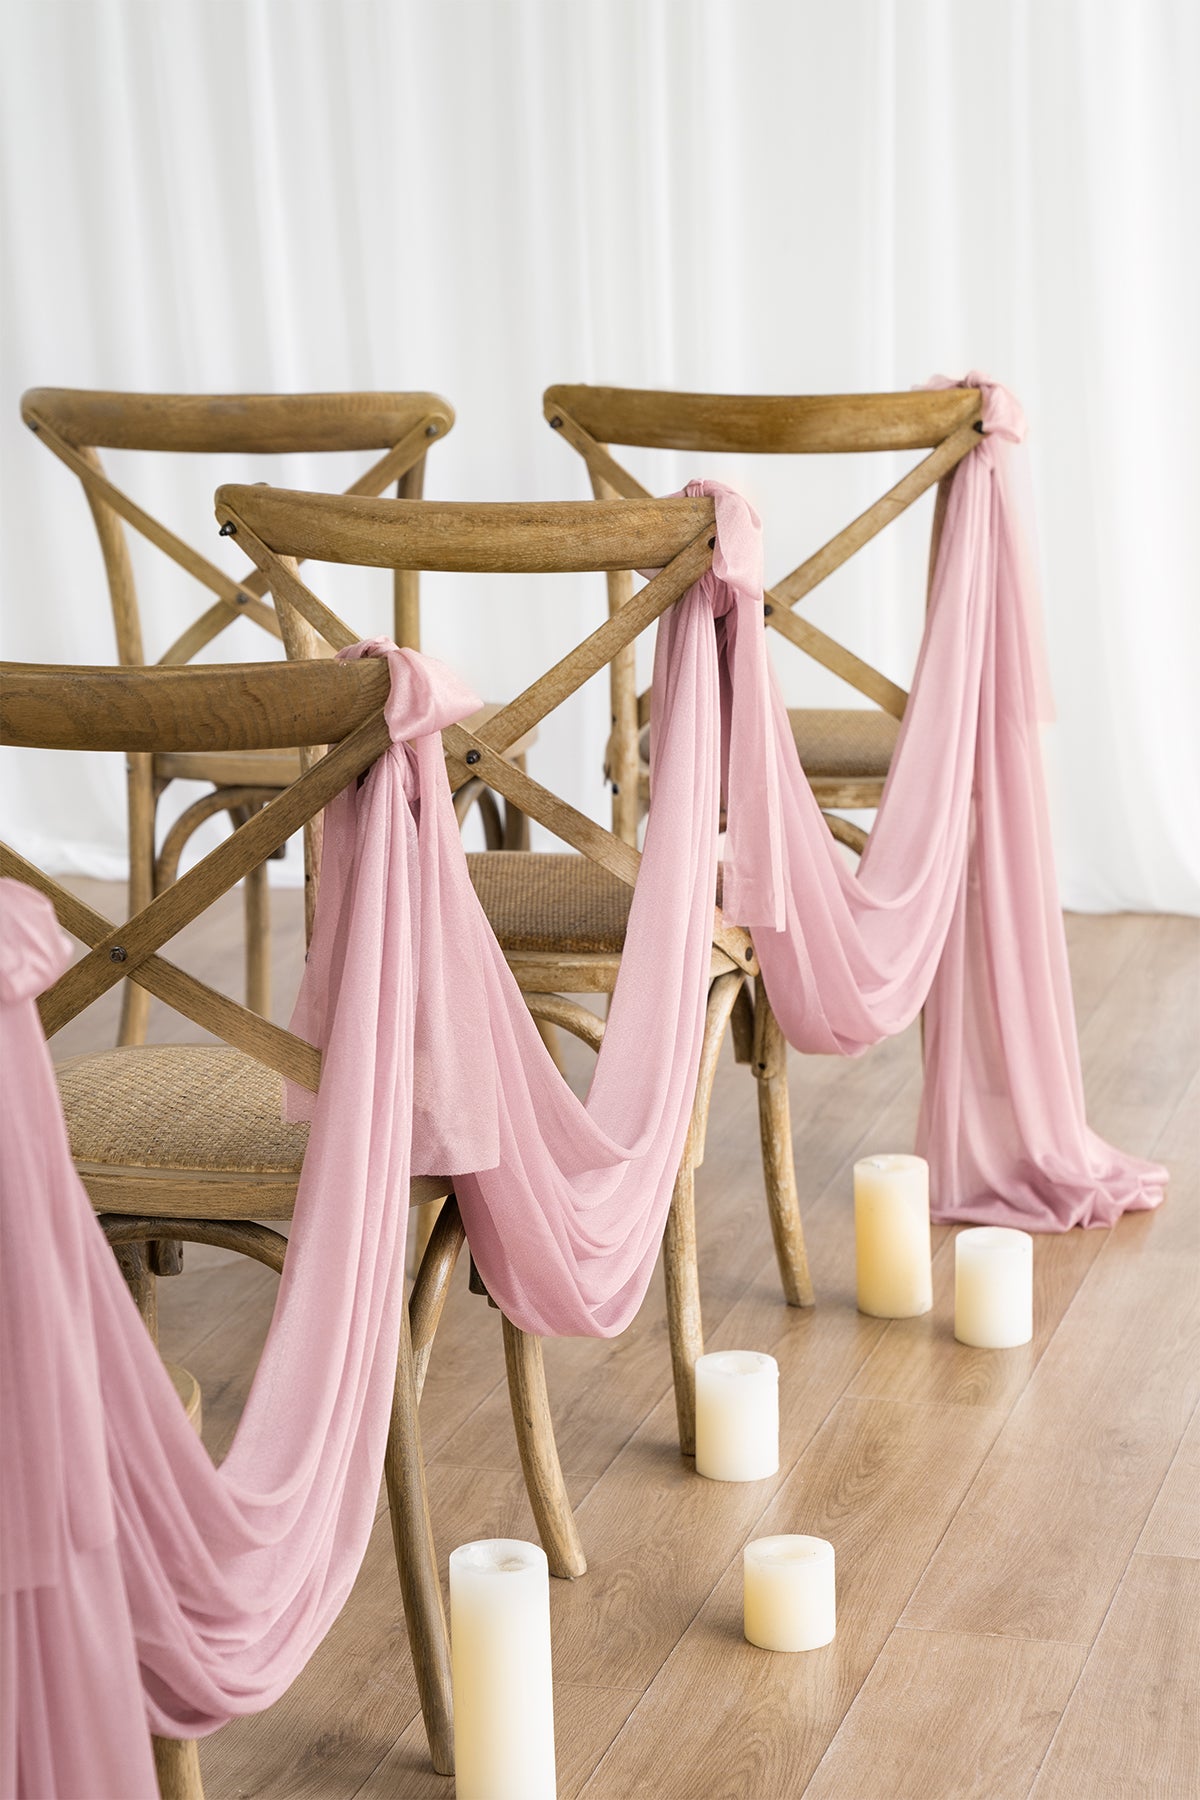 Wedding Linens  Sheer Frayed Chiffon Ribbons 1.5w x 4.5ft - Ombre Colors  – Ling's Moment